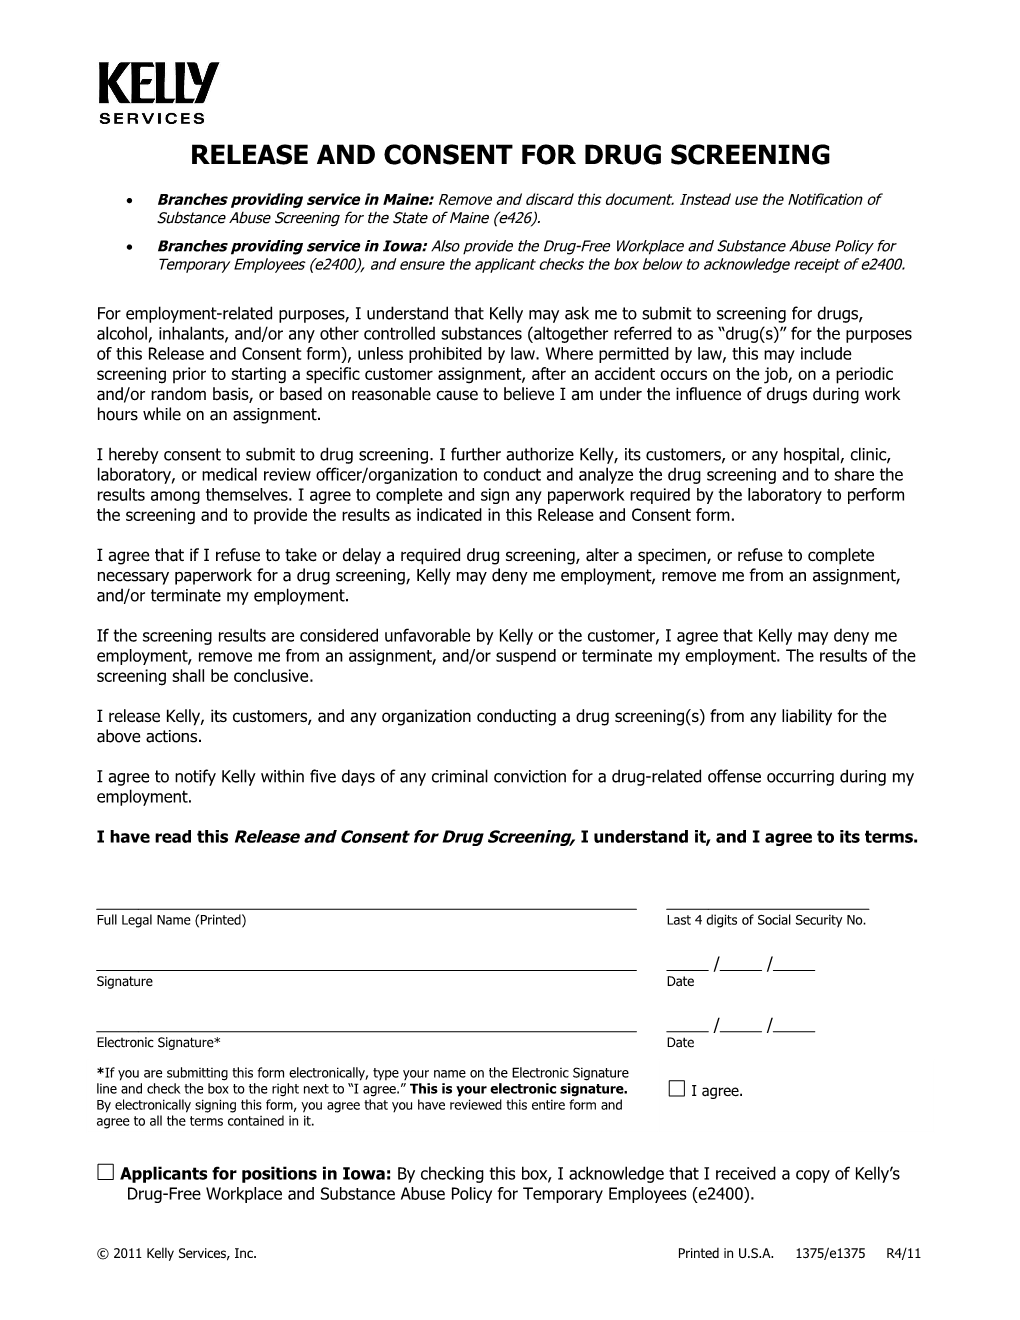 Release and Consent for Drug Screening (1375/E1375)